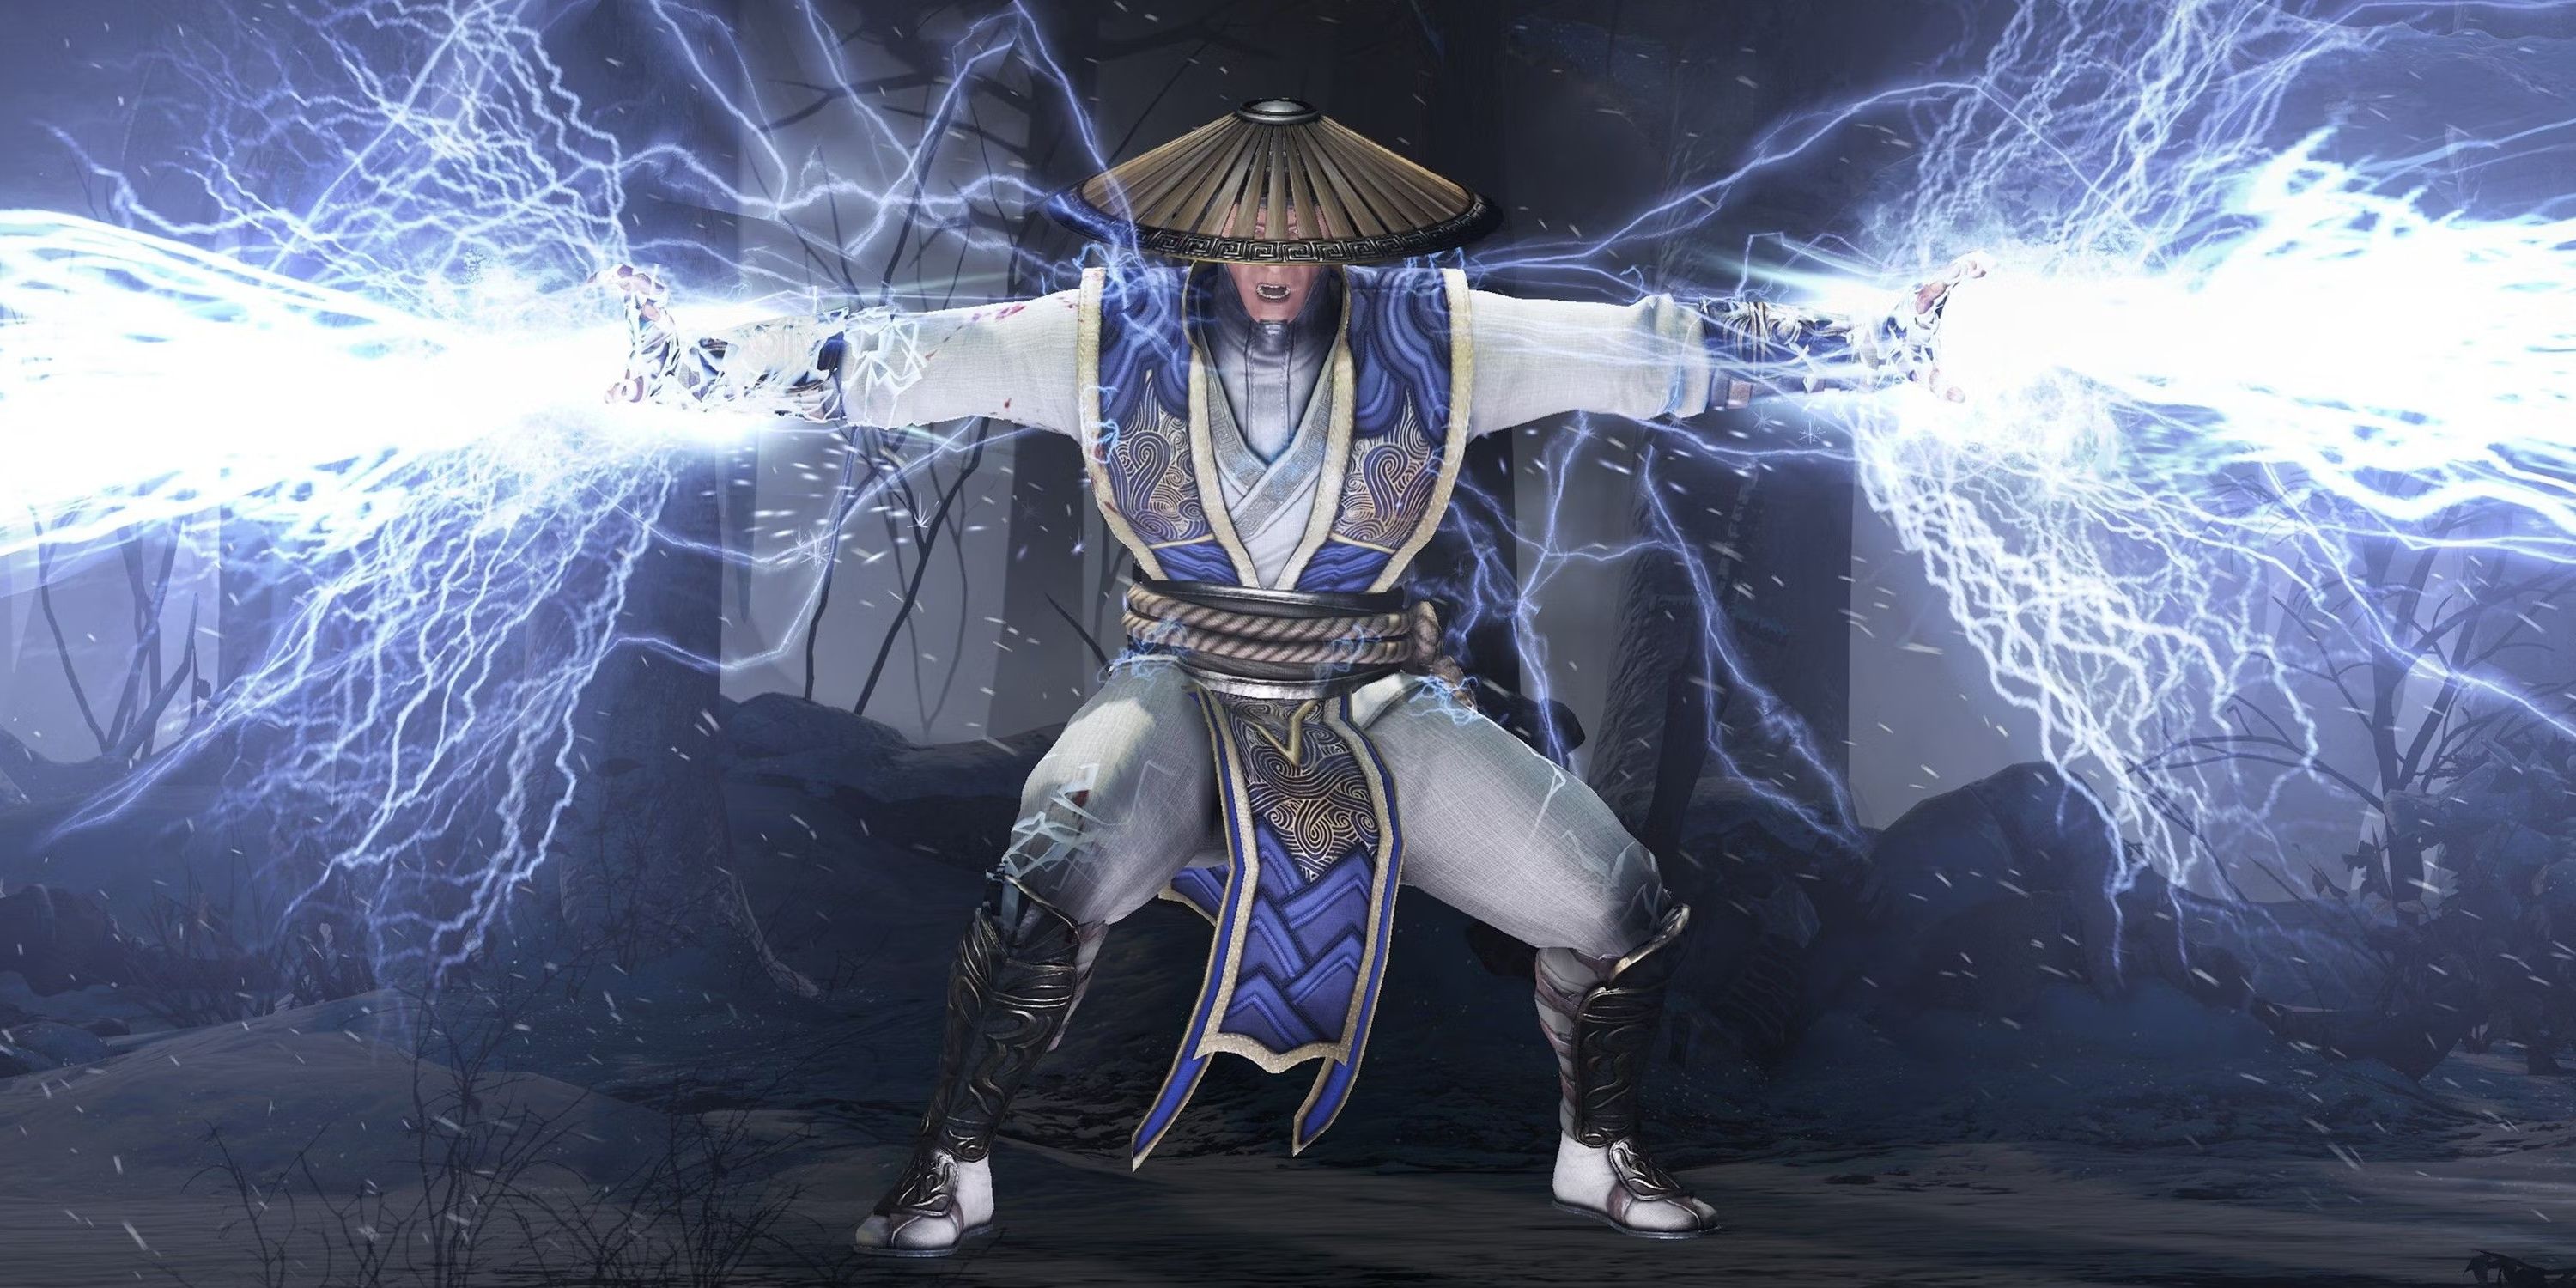 Raiden throws down some lightning and lays down the law